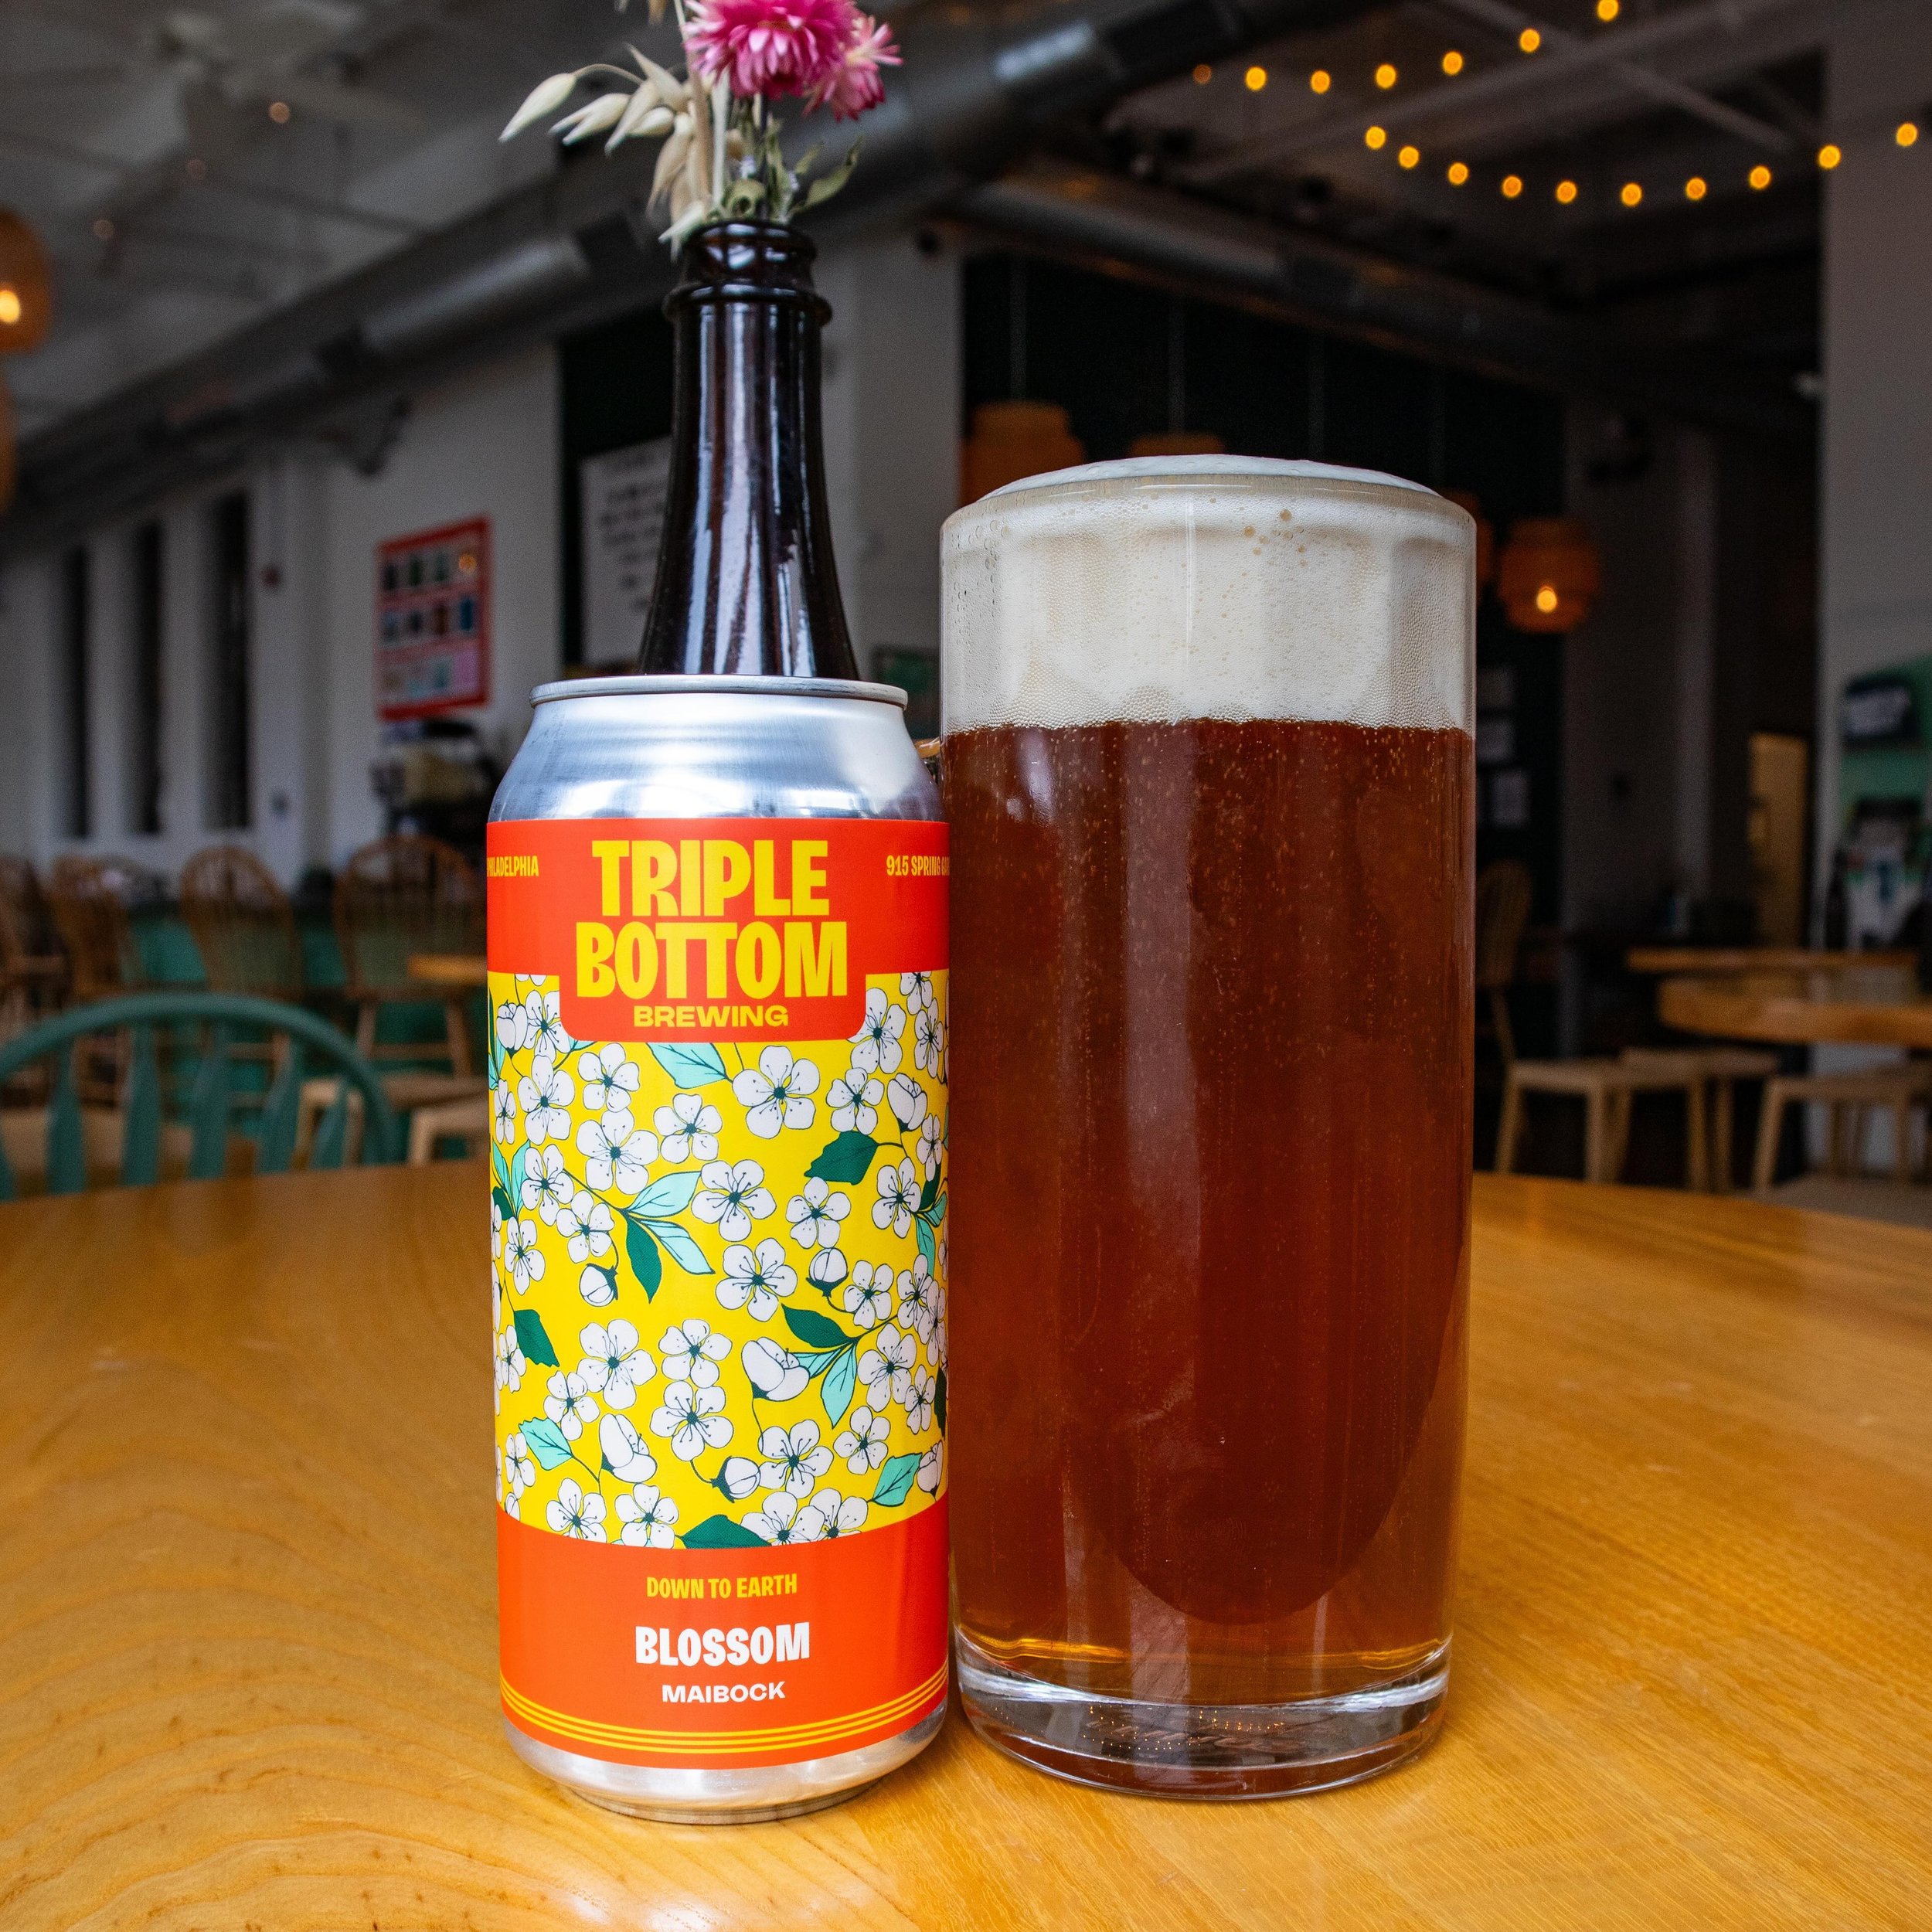 It&rsquo;s MAYbock SZN! 🌼 Blossom, our maibock is back! This earthy, lush lager was brewed specifically for the Spring and the month of May. At 6.7% ABV, it&rsquo;s malty, slightly sweet, and super easy to drink. Available now in the taproom!